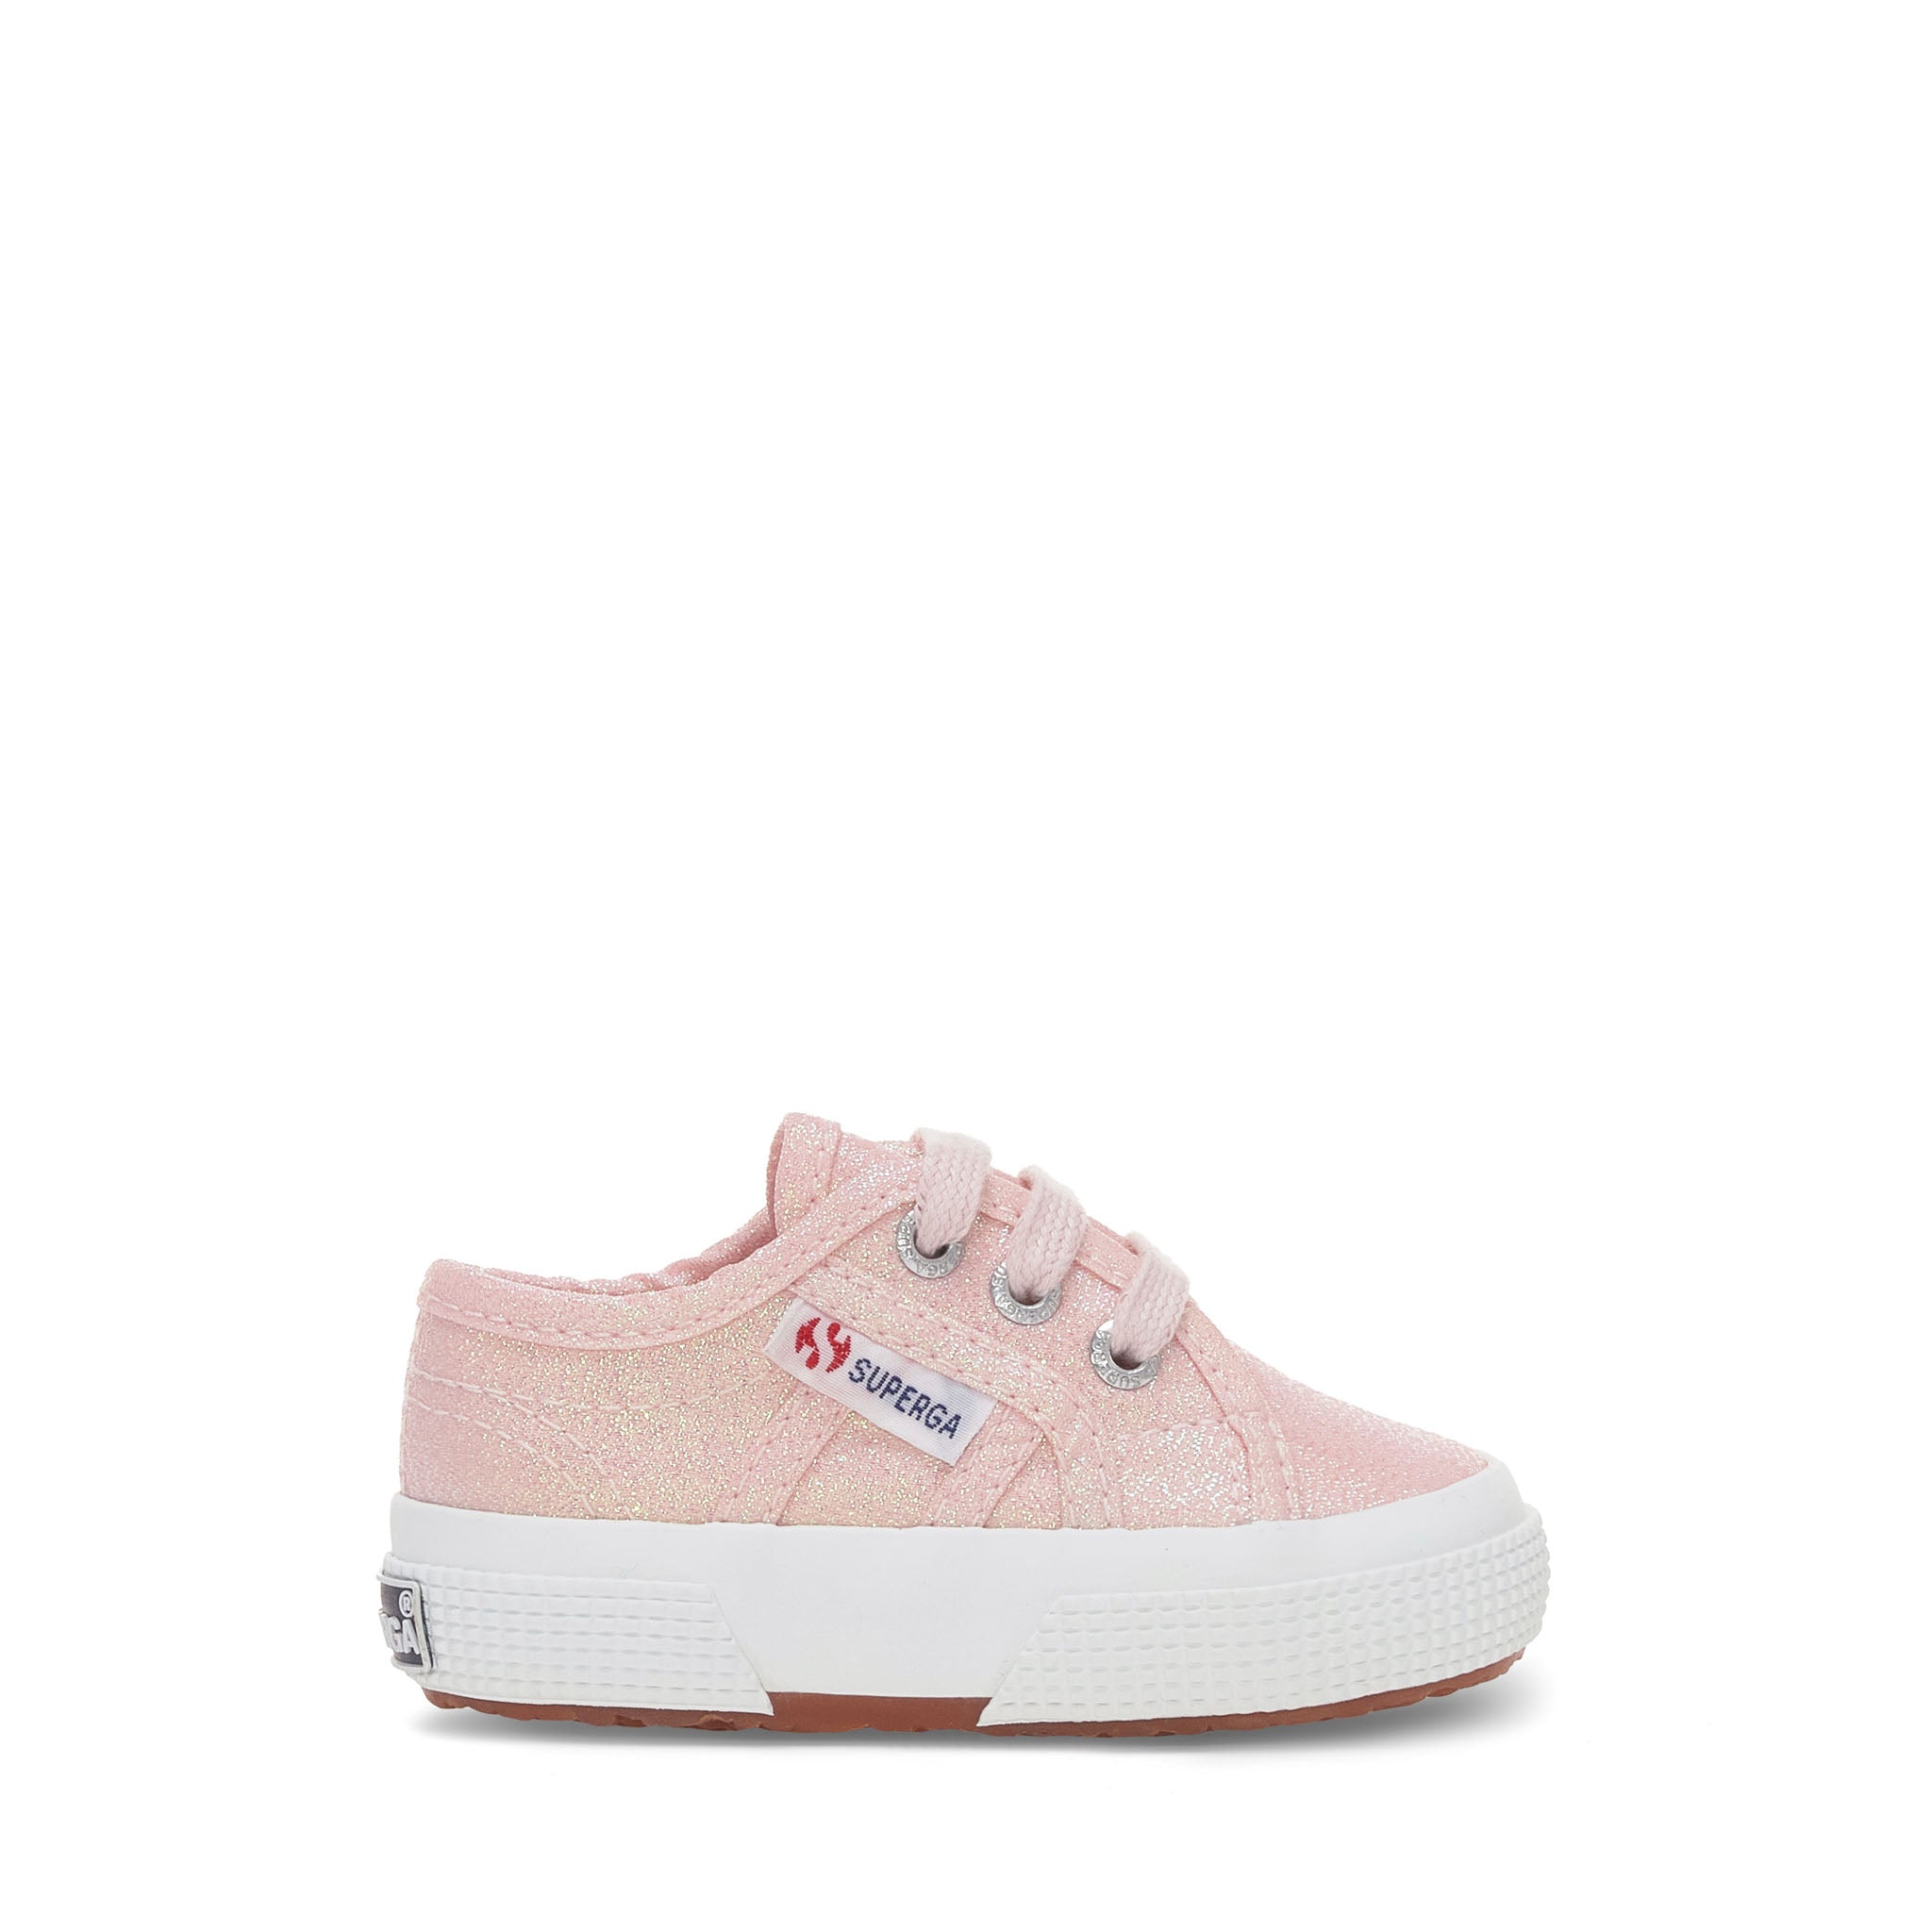 Superga 2750 Baby Lamé Sneakers - Pinkish Iridescent. Side view.